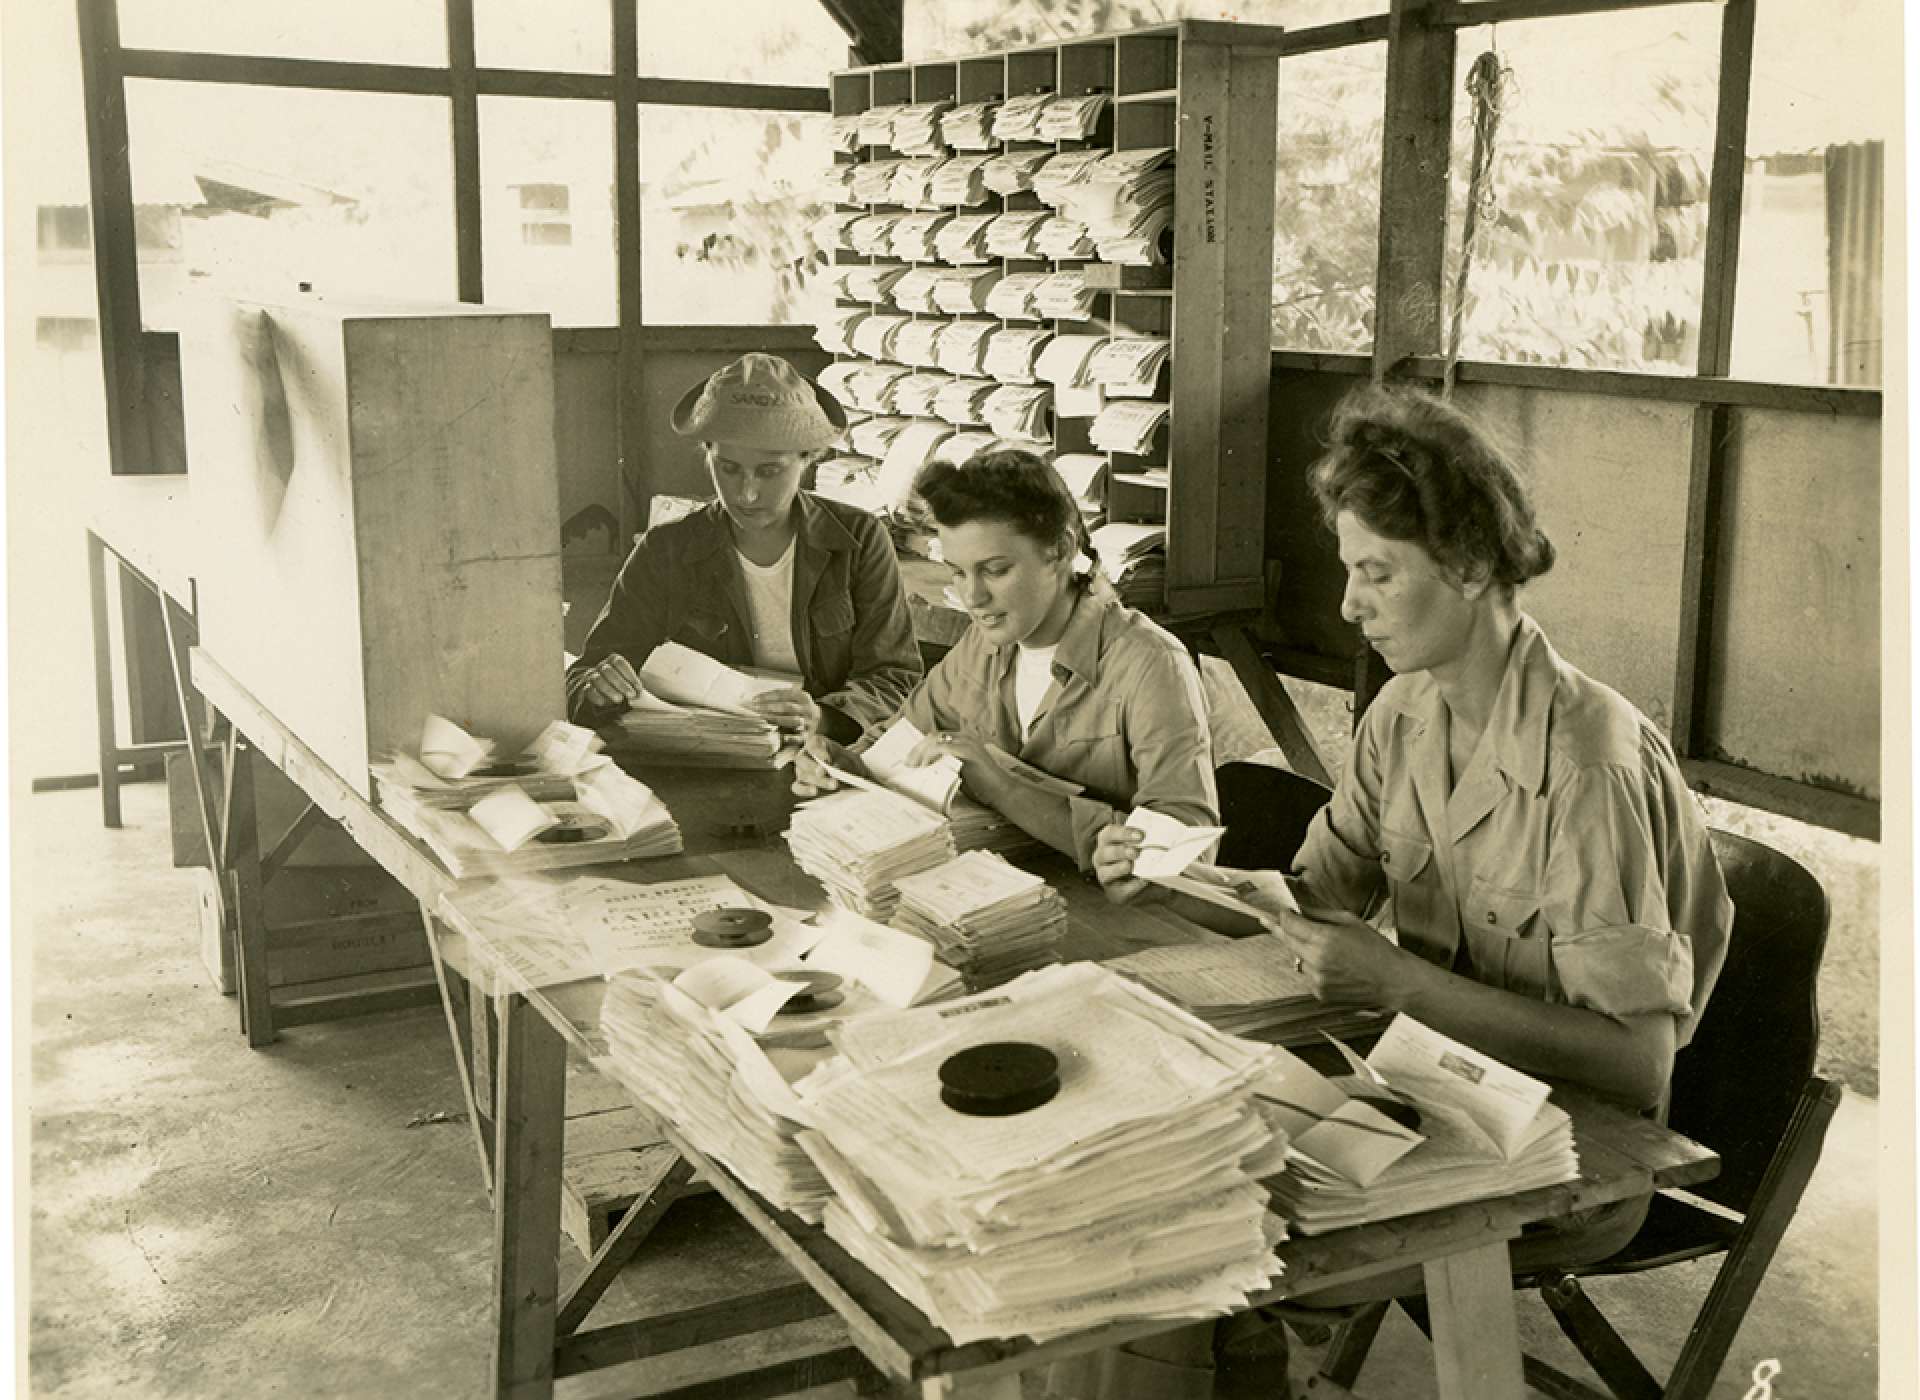 V-mail operation in the field at APO 929. “Here is a section of the opening and targeting operation. Targeting is simply preparing each group of letters with a State target so mail for each group of States can be sent to its proper finishing station in the States. Here also, are withdrawn all letters which will not photograph well. These, of necessity, must be sent by regular mail, which in this case means by air.” Port Moresby, Papua New Guinea. 1944